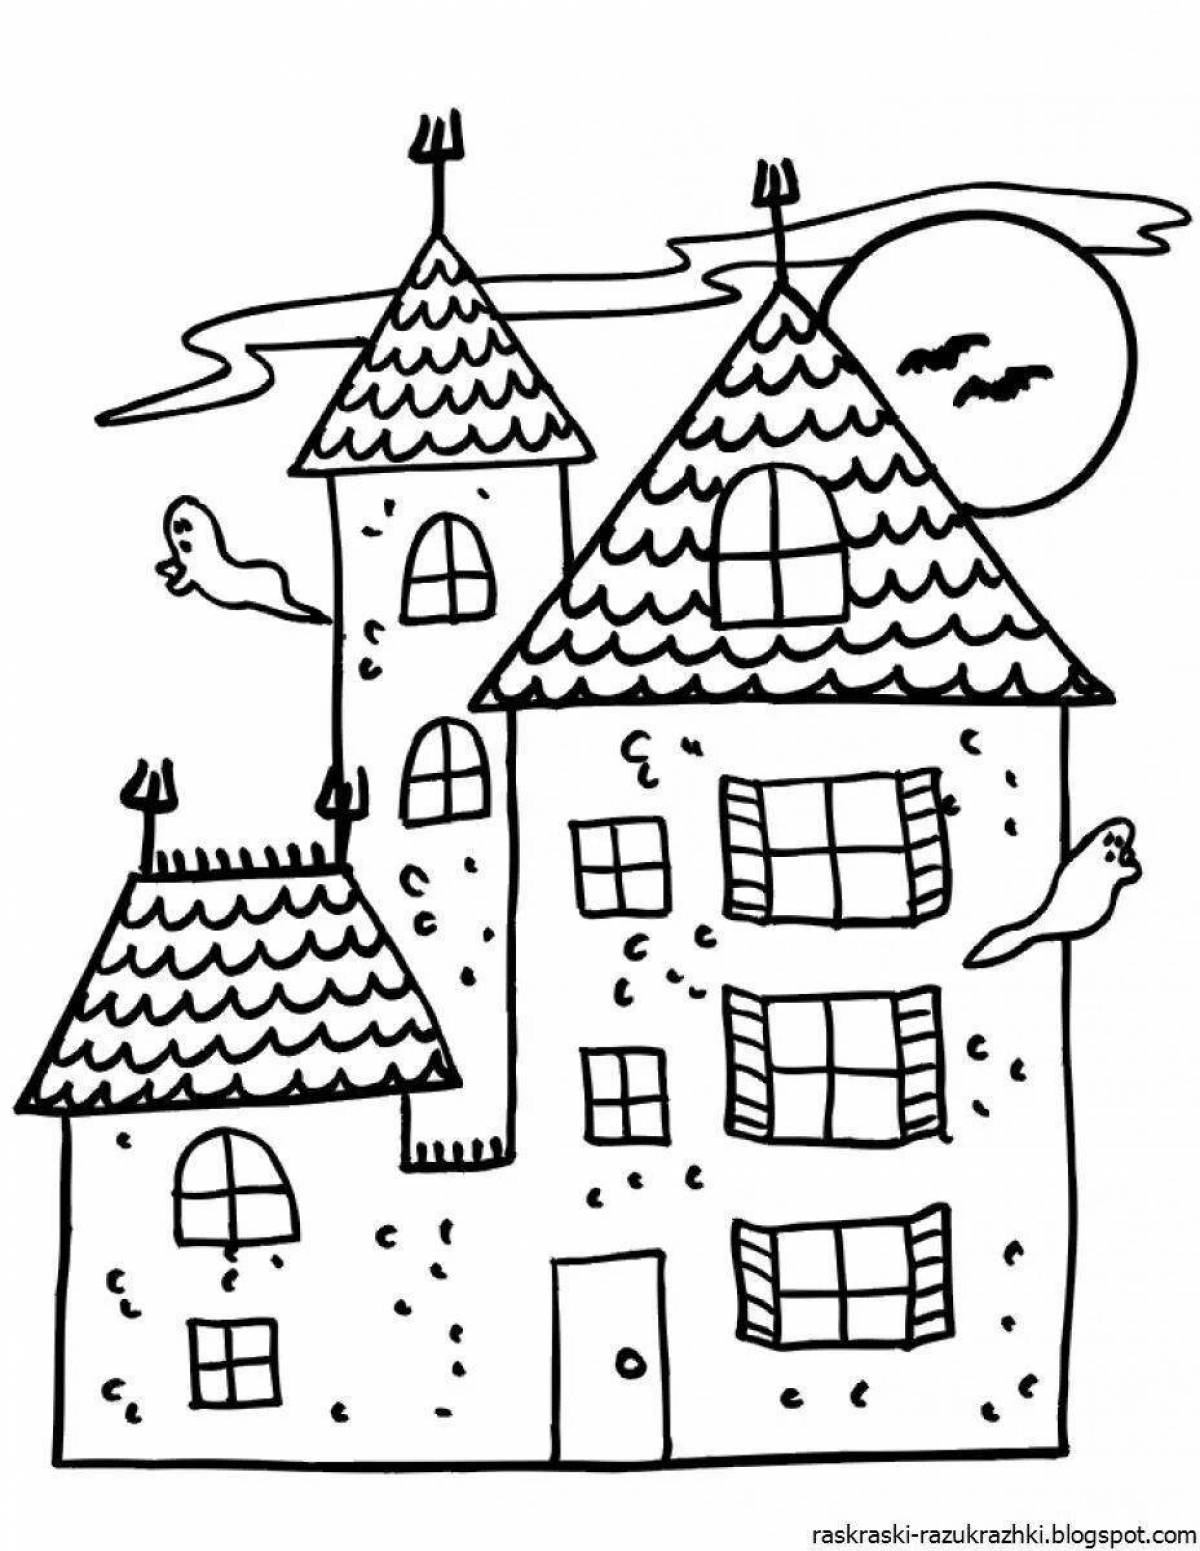 Coloring page adorable houses for boys